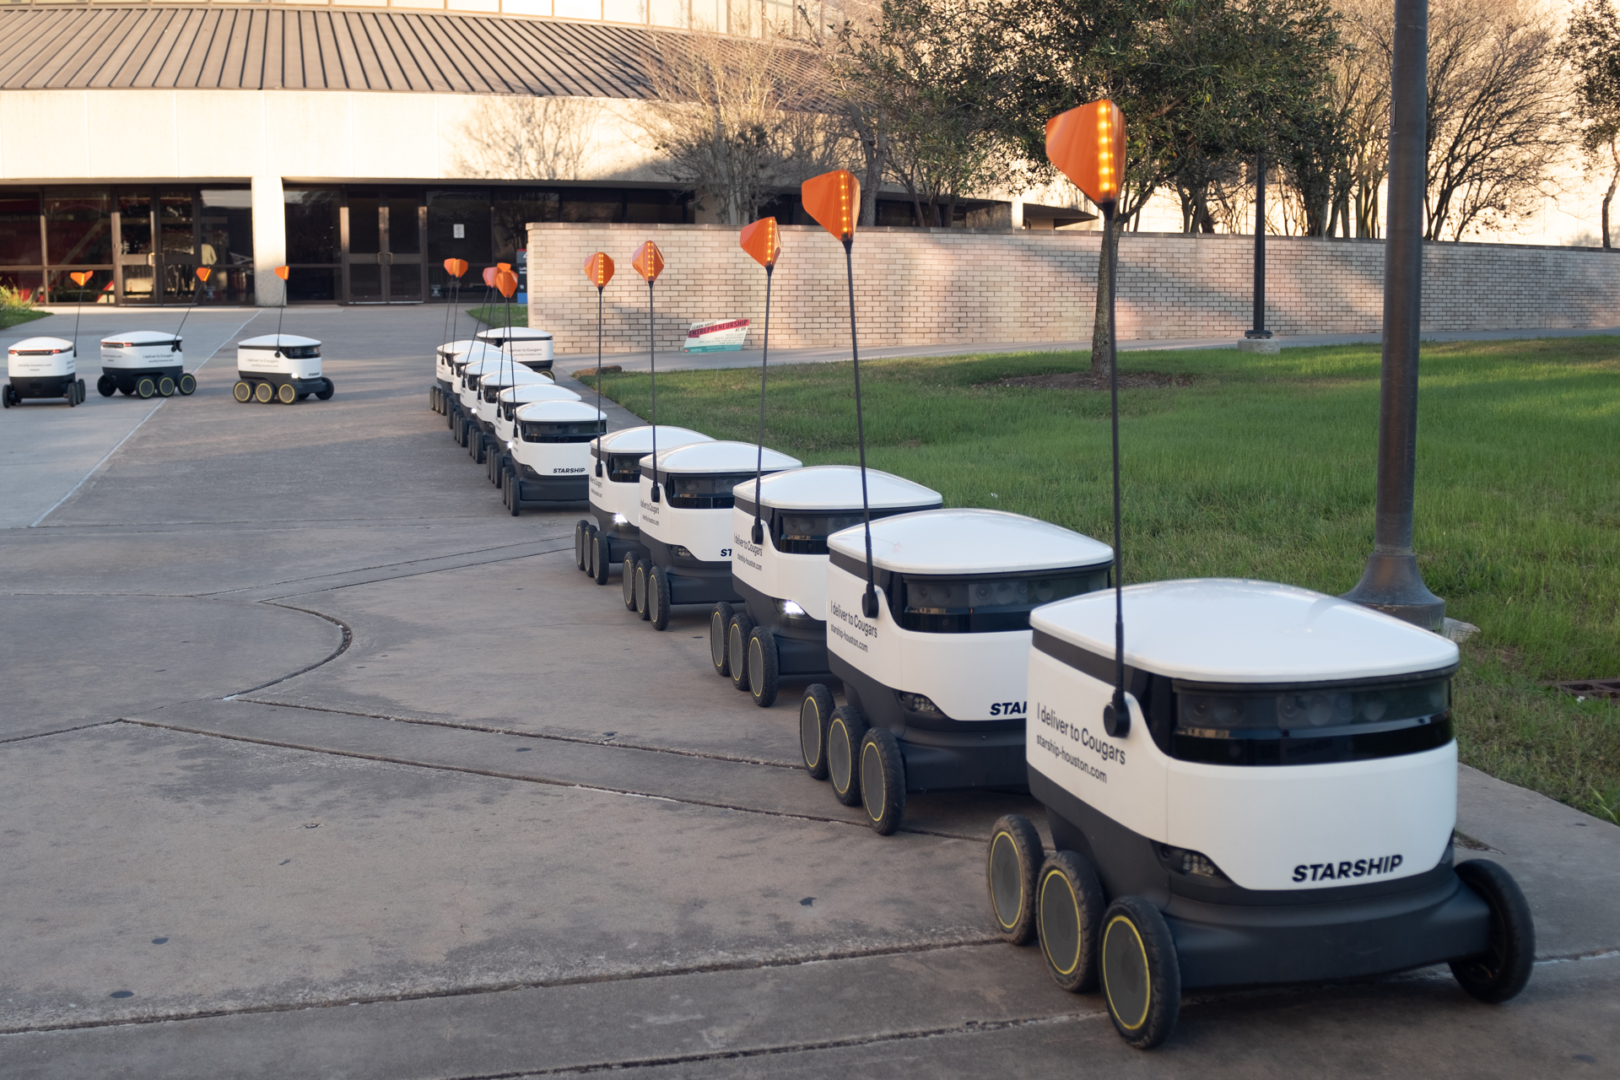 The food delivery robots saw their largest sale day during the coronavirus pandemic, according to Starship Technologies. | Kathryn Lenihan/The Cougar